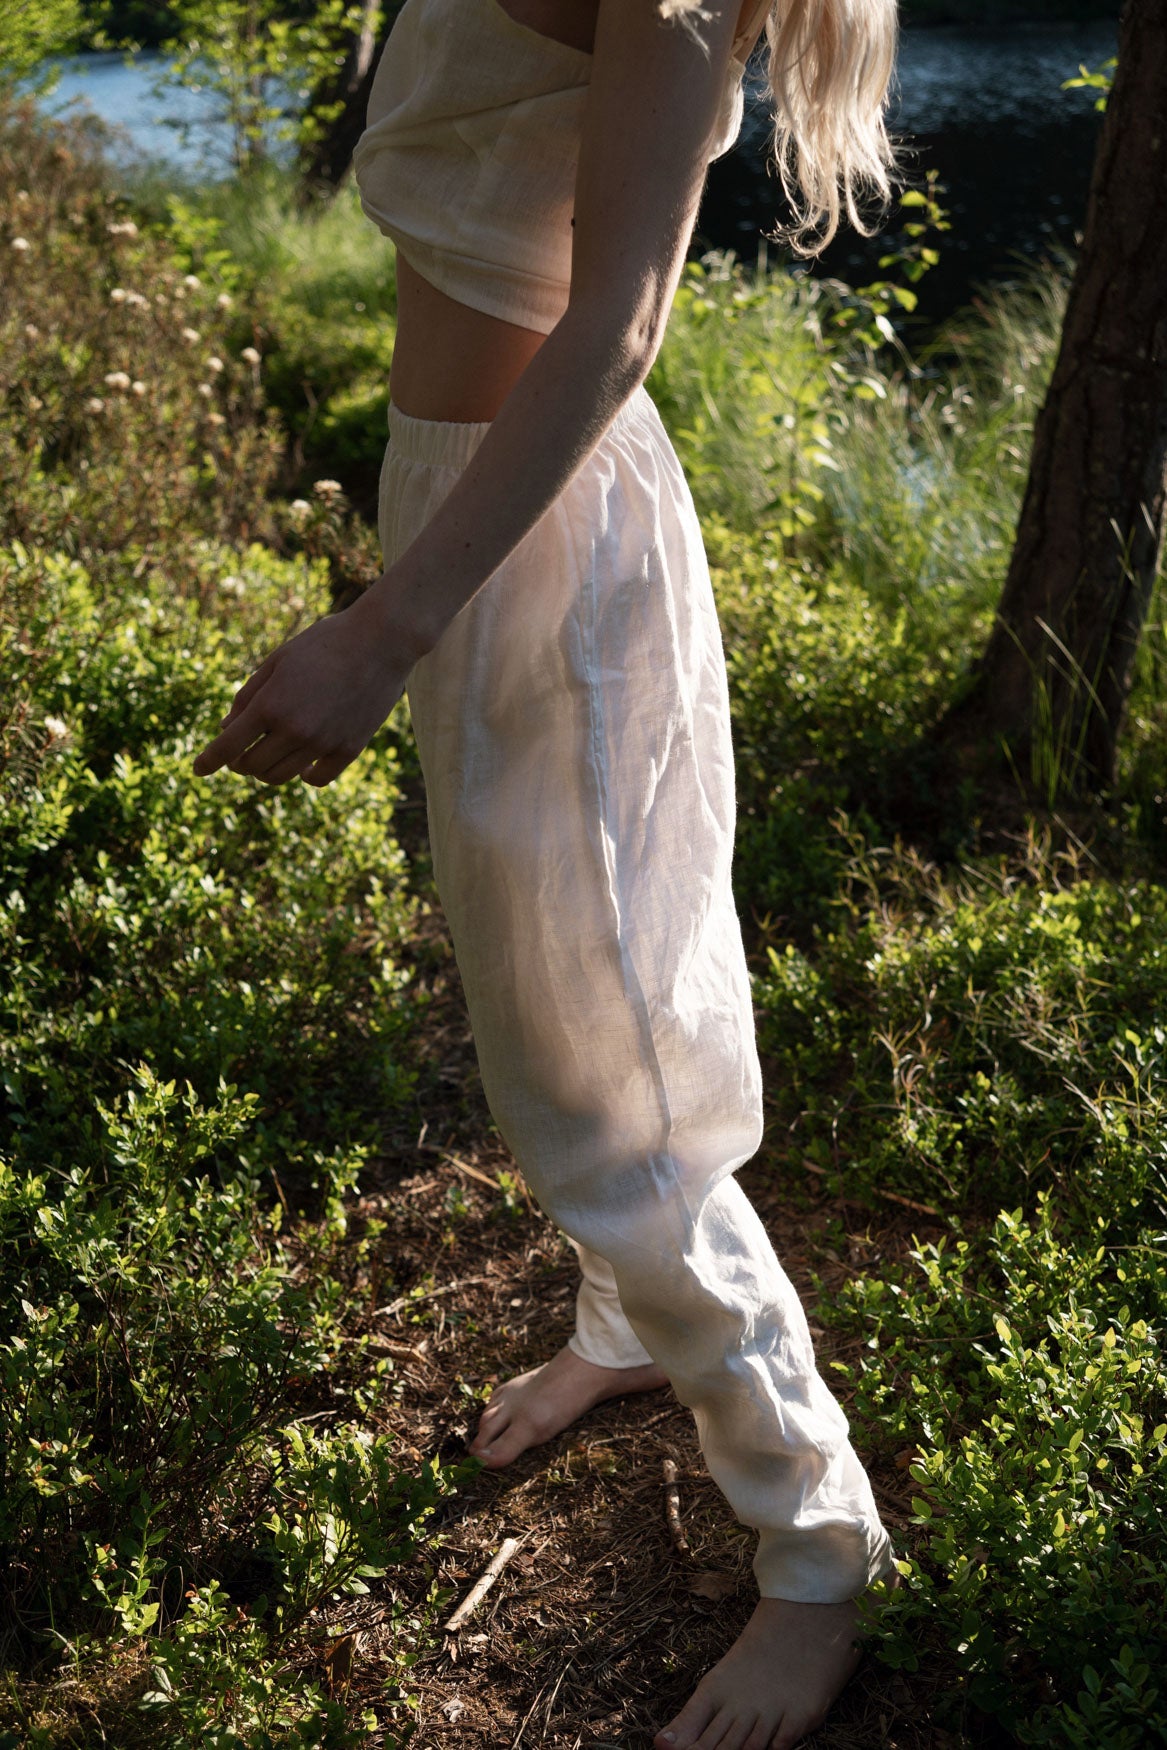 Organic, sustainable white linen pants and top that can be worn as a loungewear, pajamas or sweatpants with a top. These pants are natural, comfortable, soft and pure. These pants are a conscious and healthy choice for your body and environment. Handmade in the North.